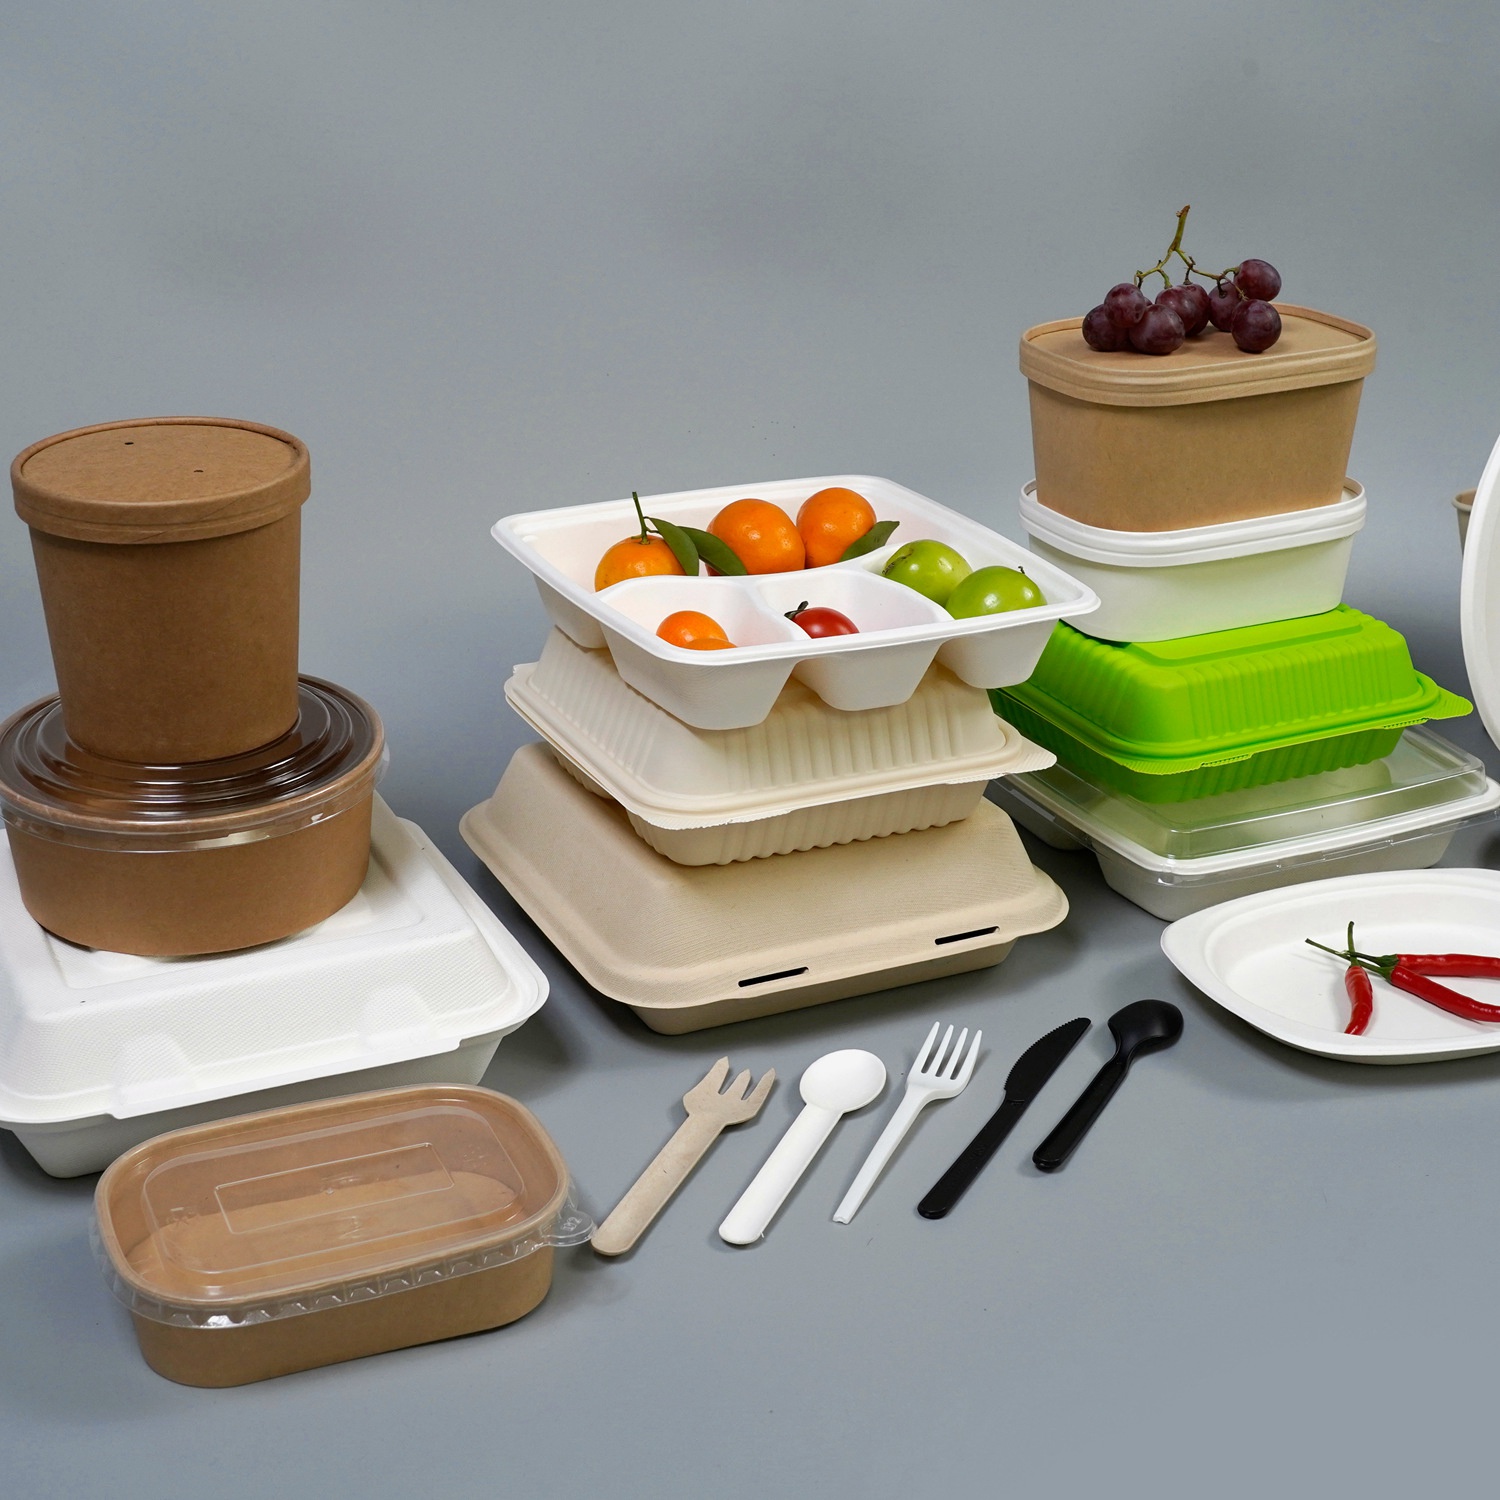 What is the importance of biodegradable and ecofriendly packaging? eco friendly plates and bowls, biodegradable clamshell containers, Eco-Friendly Packaging, biodegradable and ecofriendly packaging